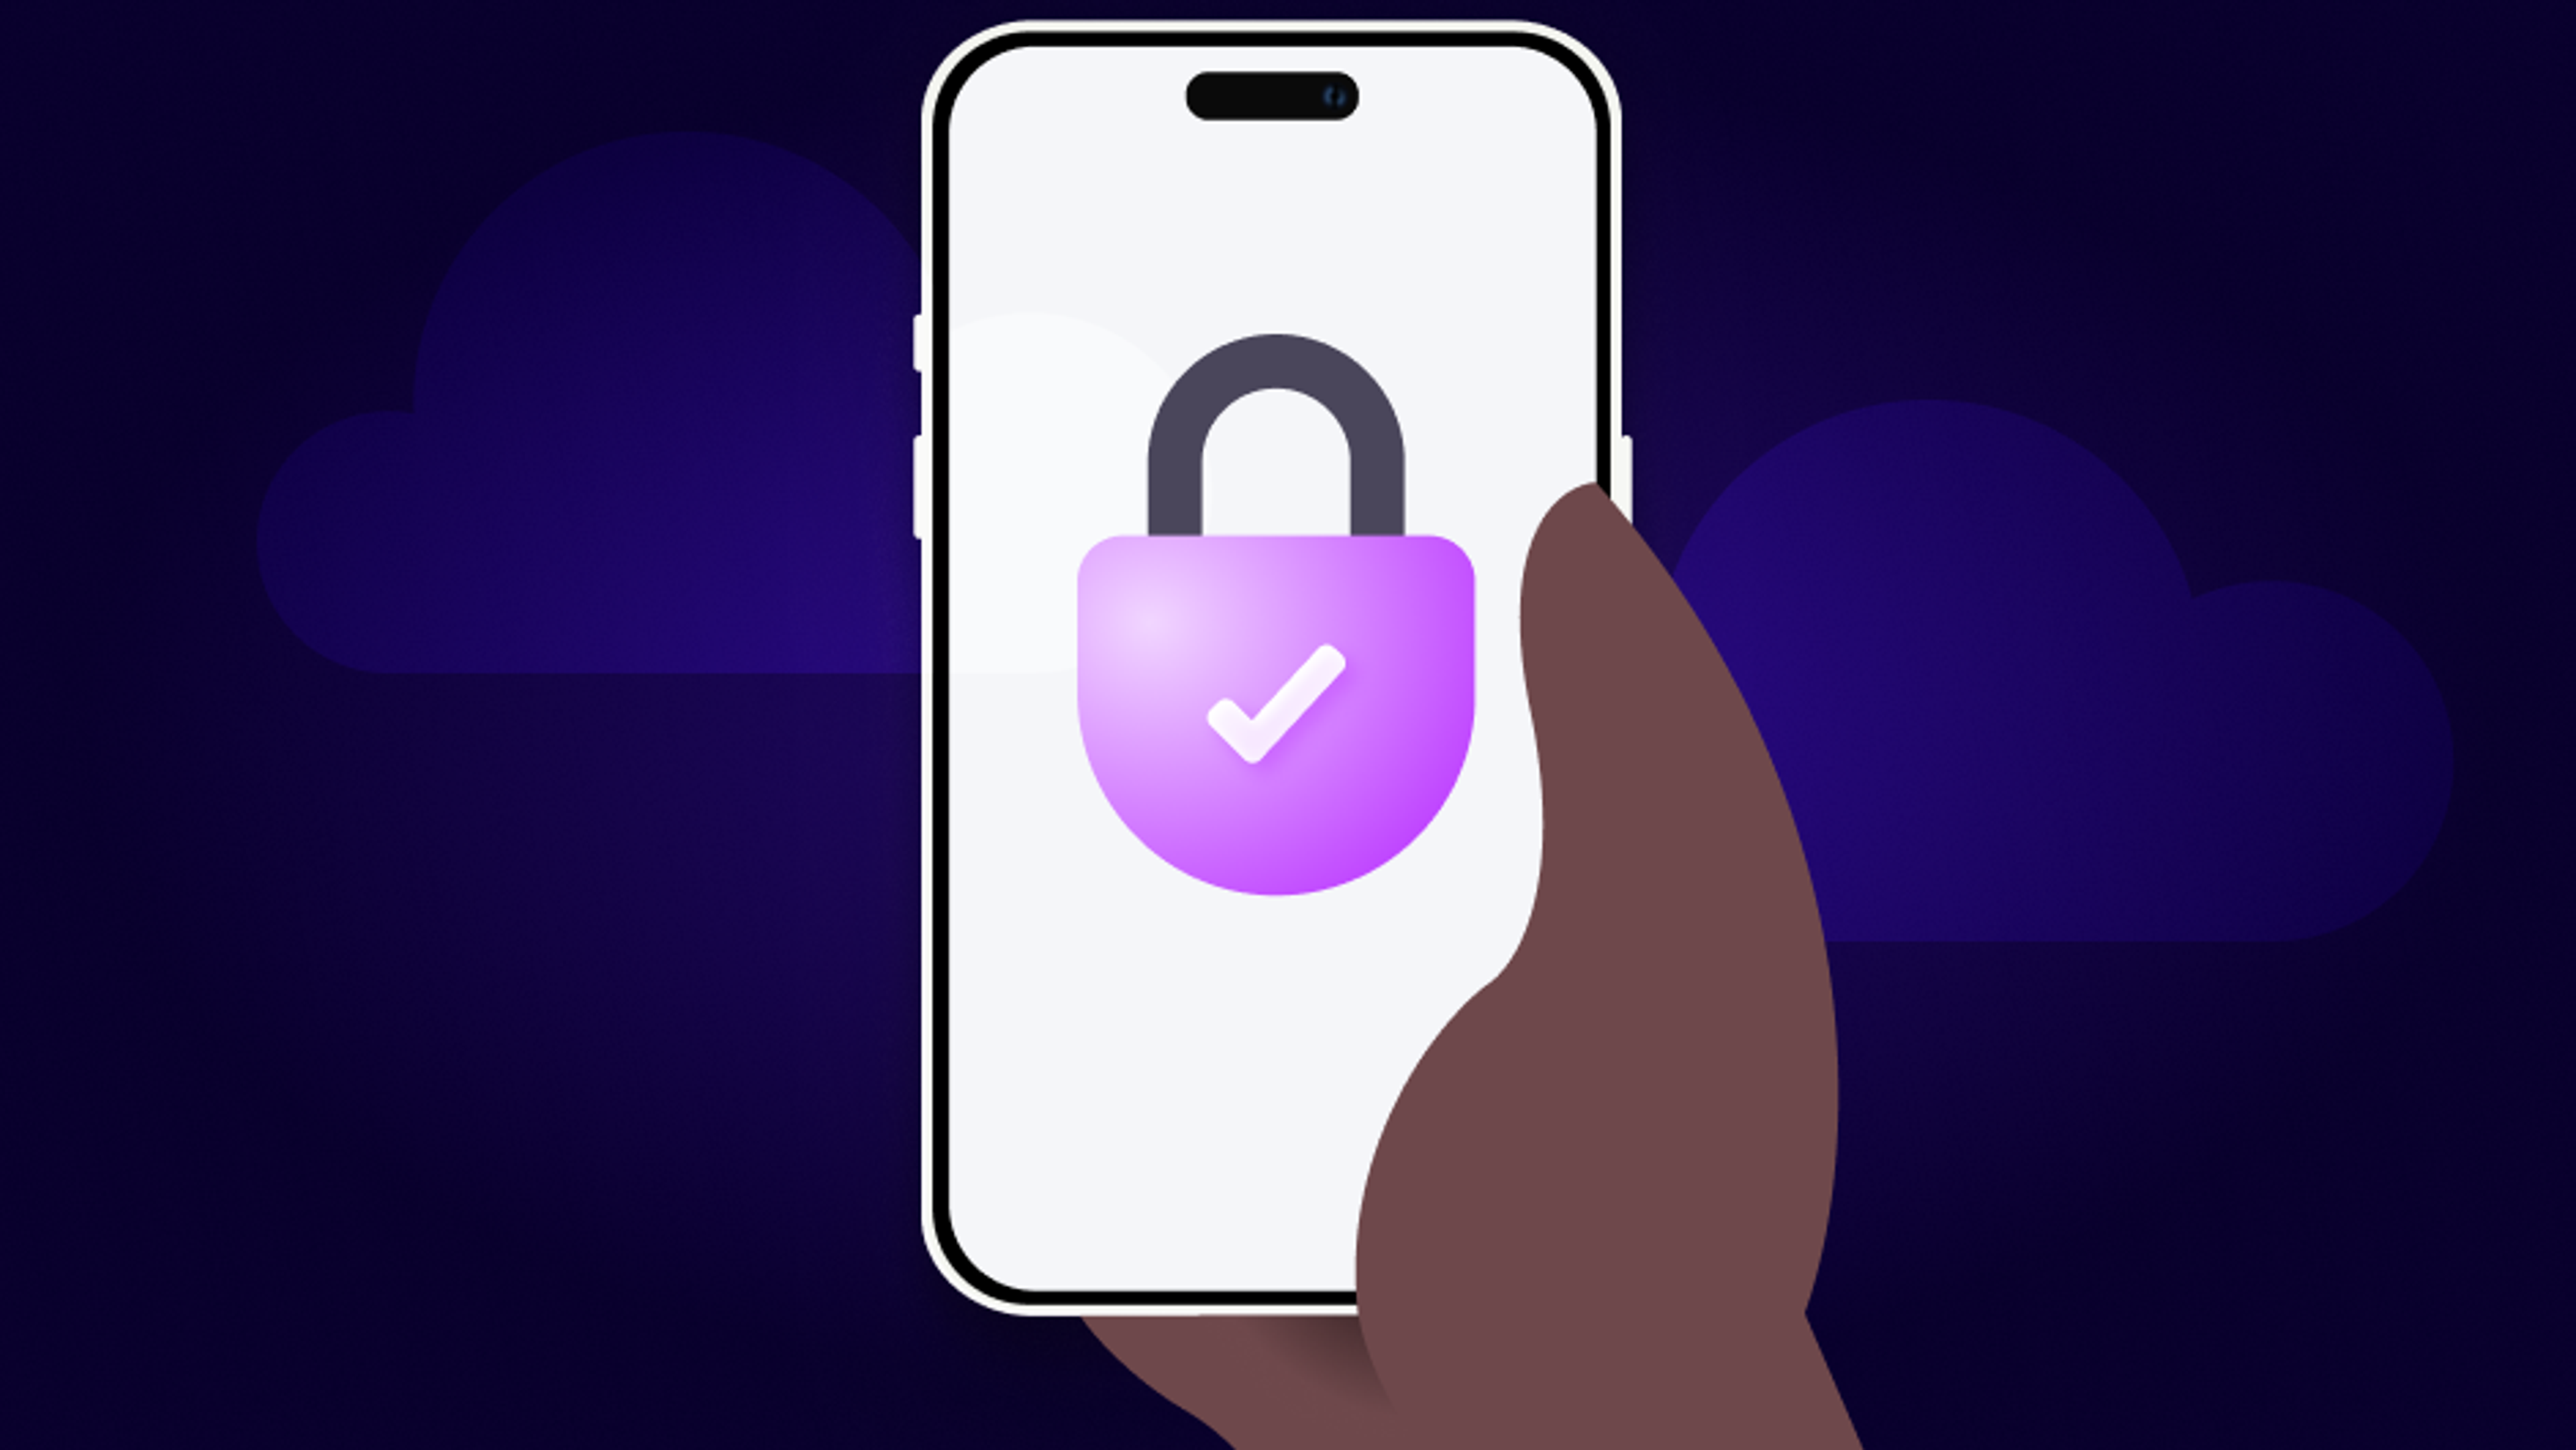 Zego illustration of a hand holding a phone with a secure padlock for trust